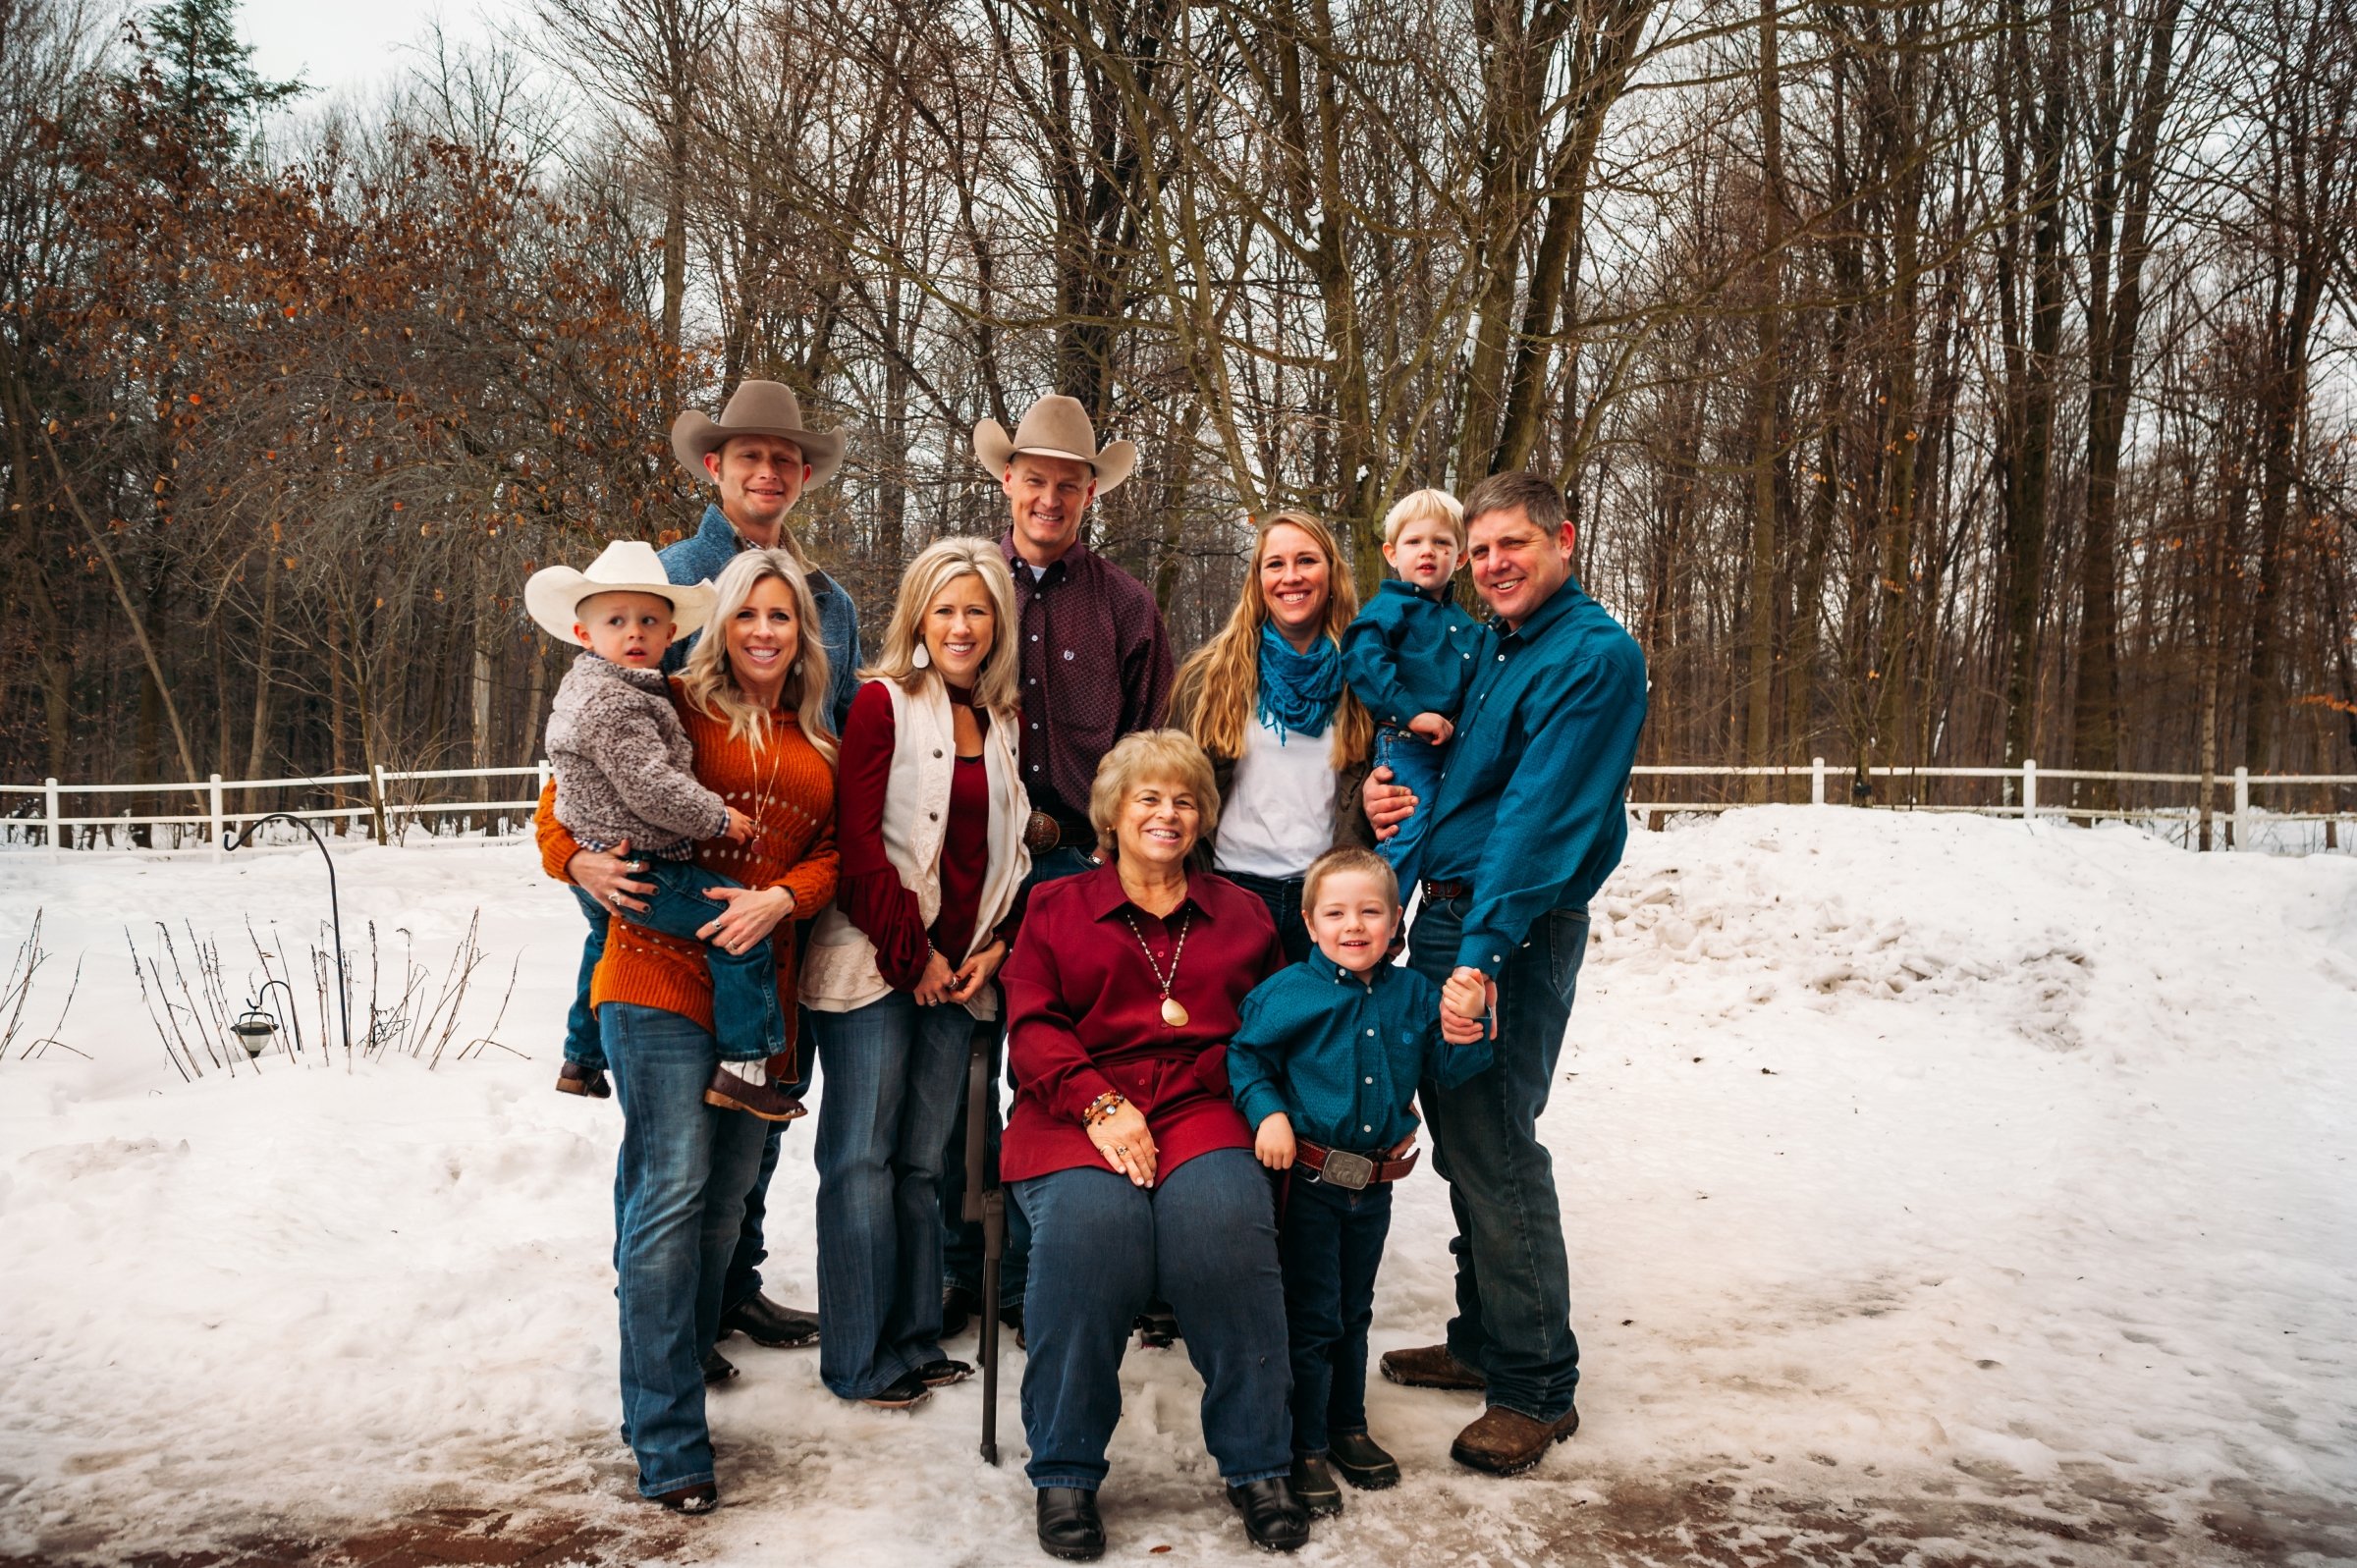 extended family photo session for mothers day gift idea